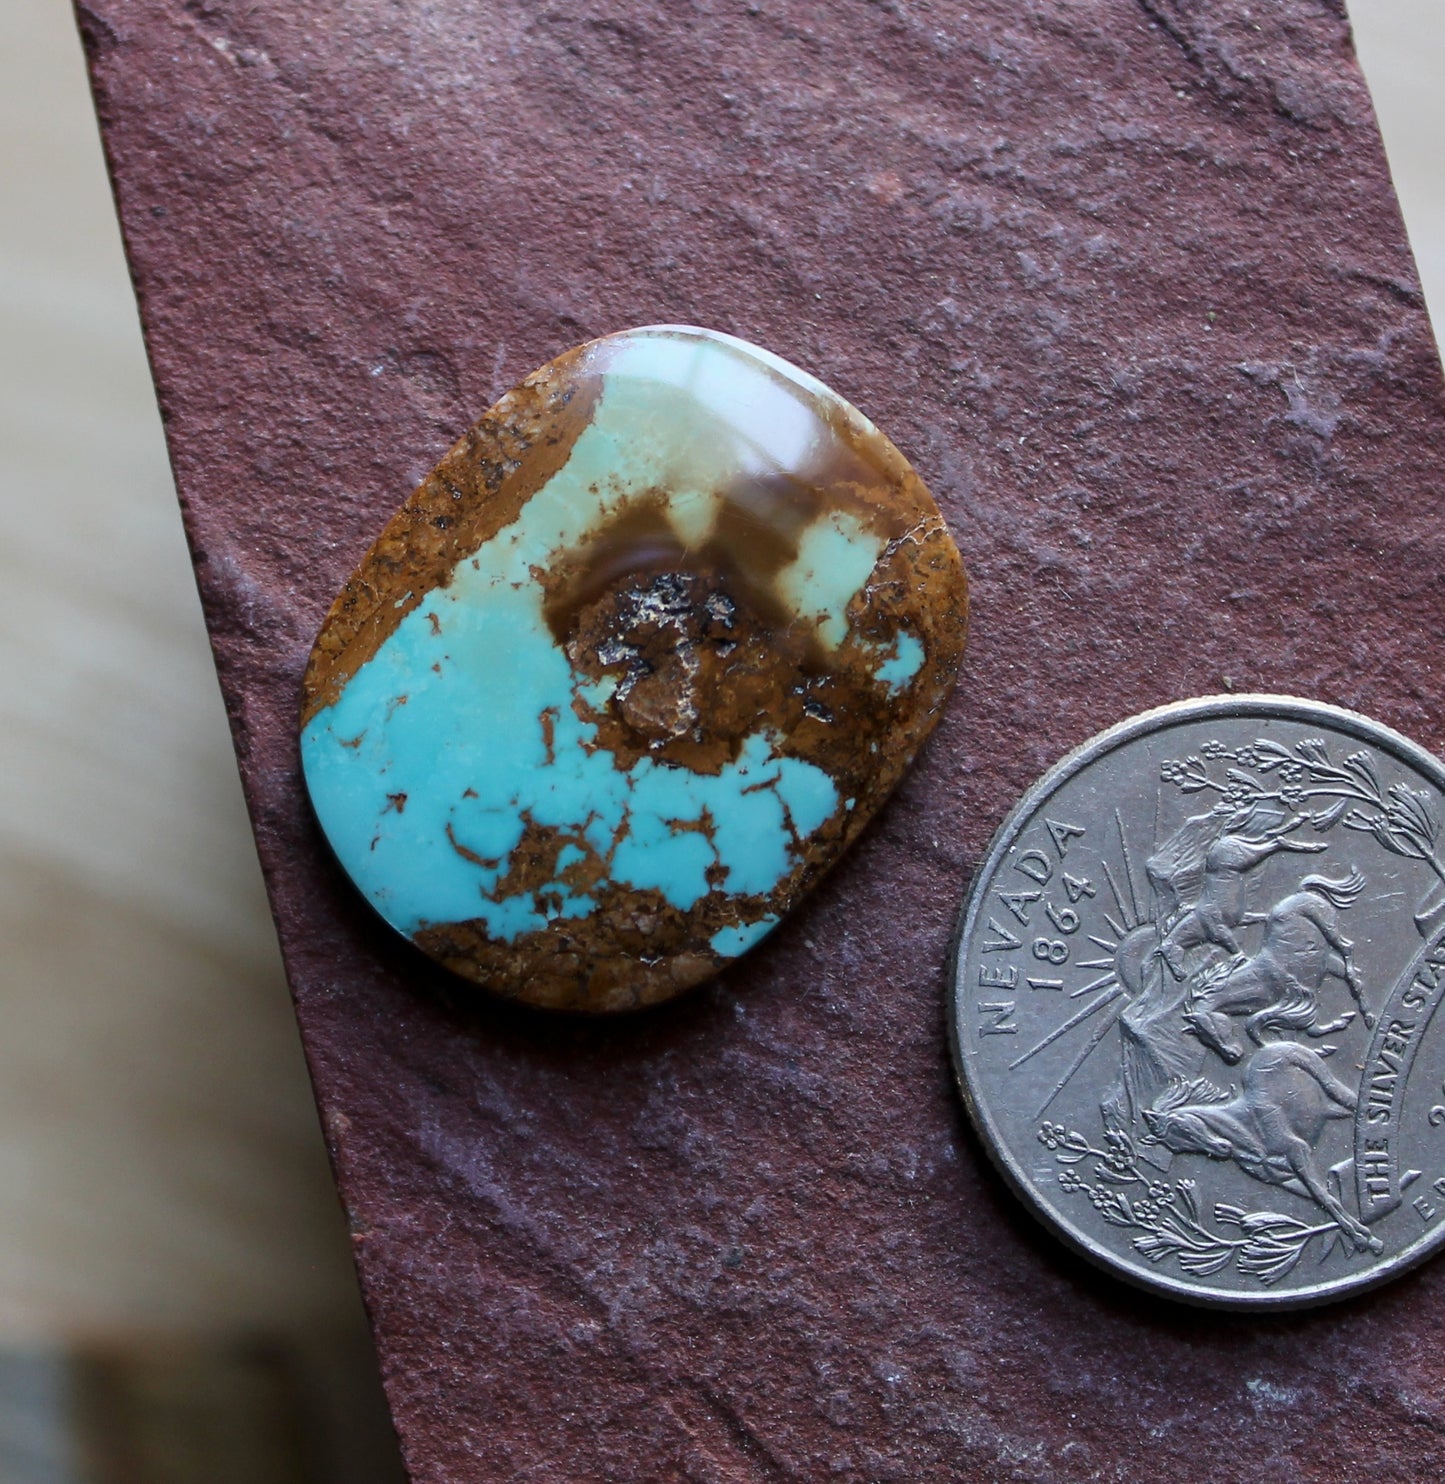 22 carat blue Stone Mountain Turquoise cabochon with red matrix